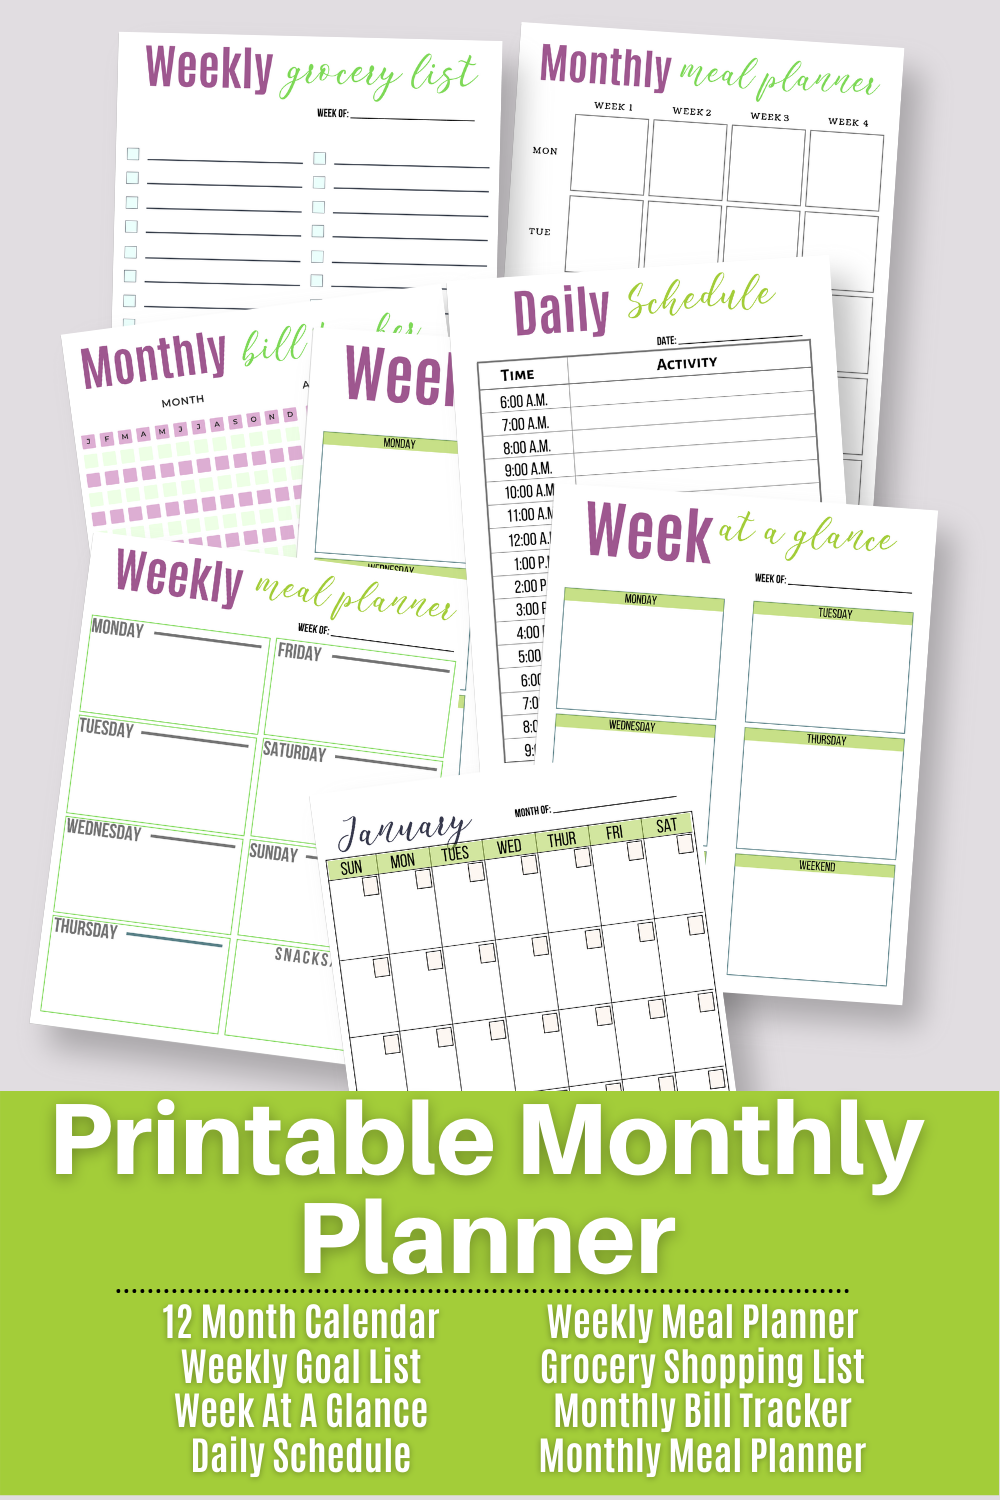 printable monthly planner